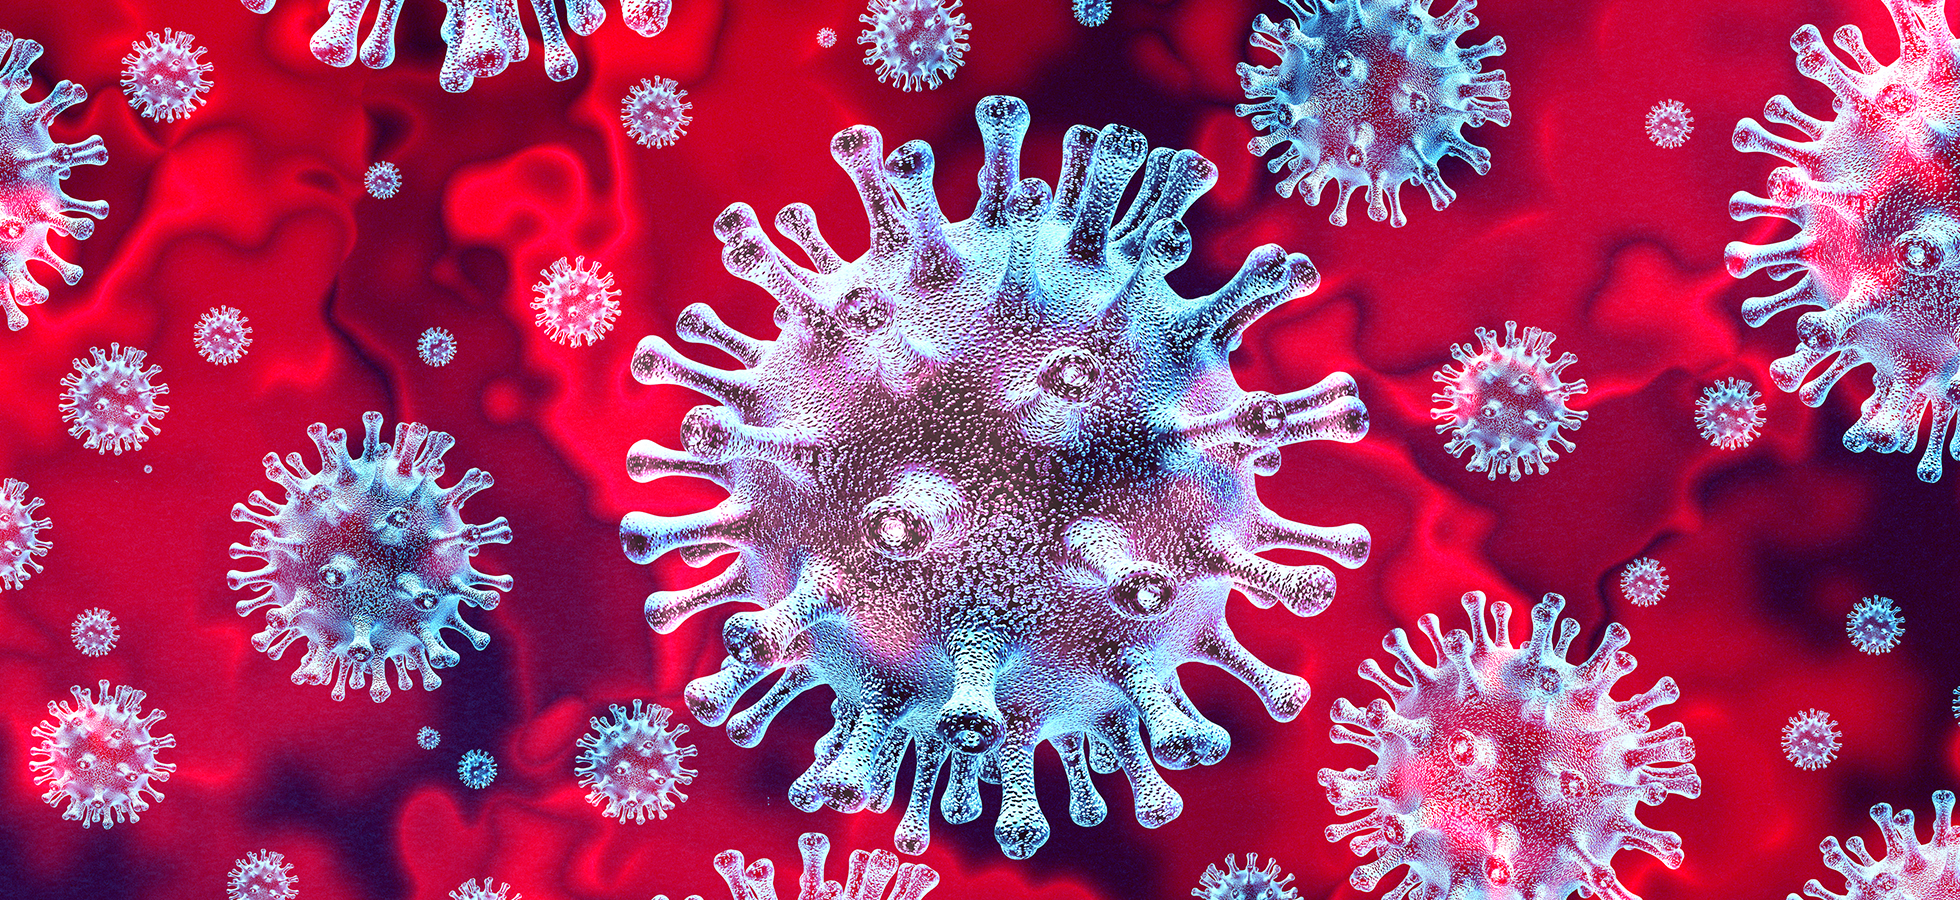 A microscopic view of a coronavirus cell.